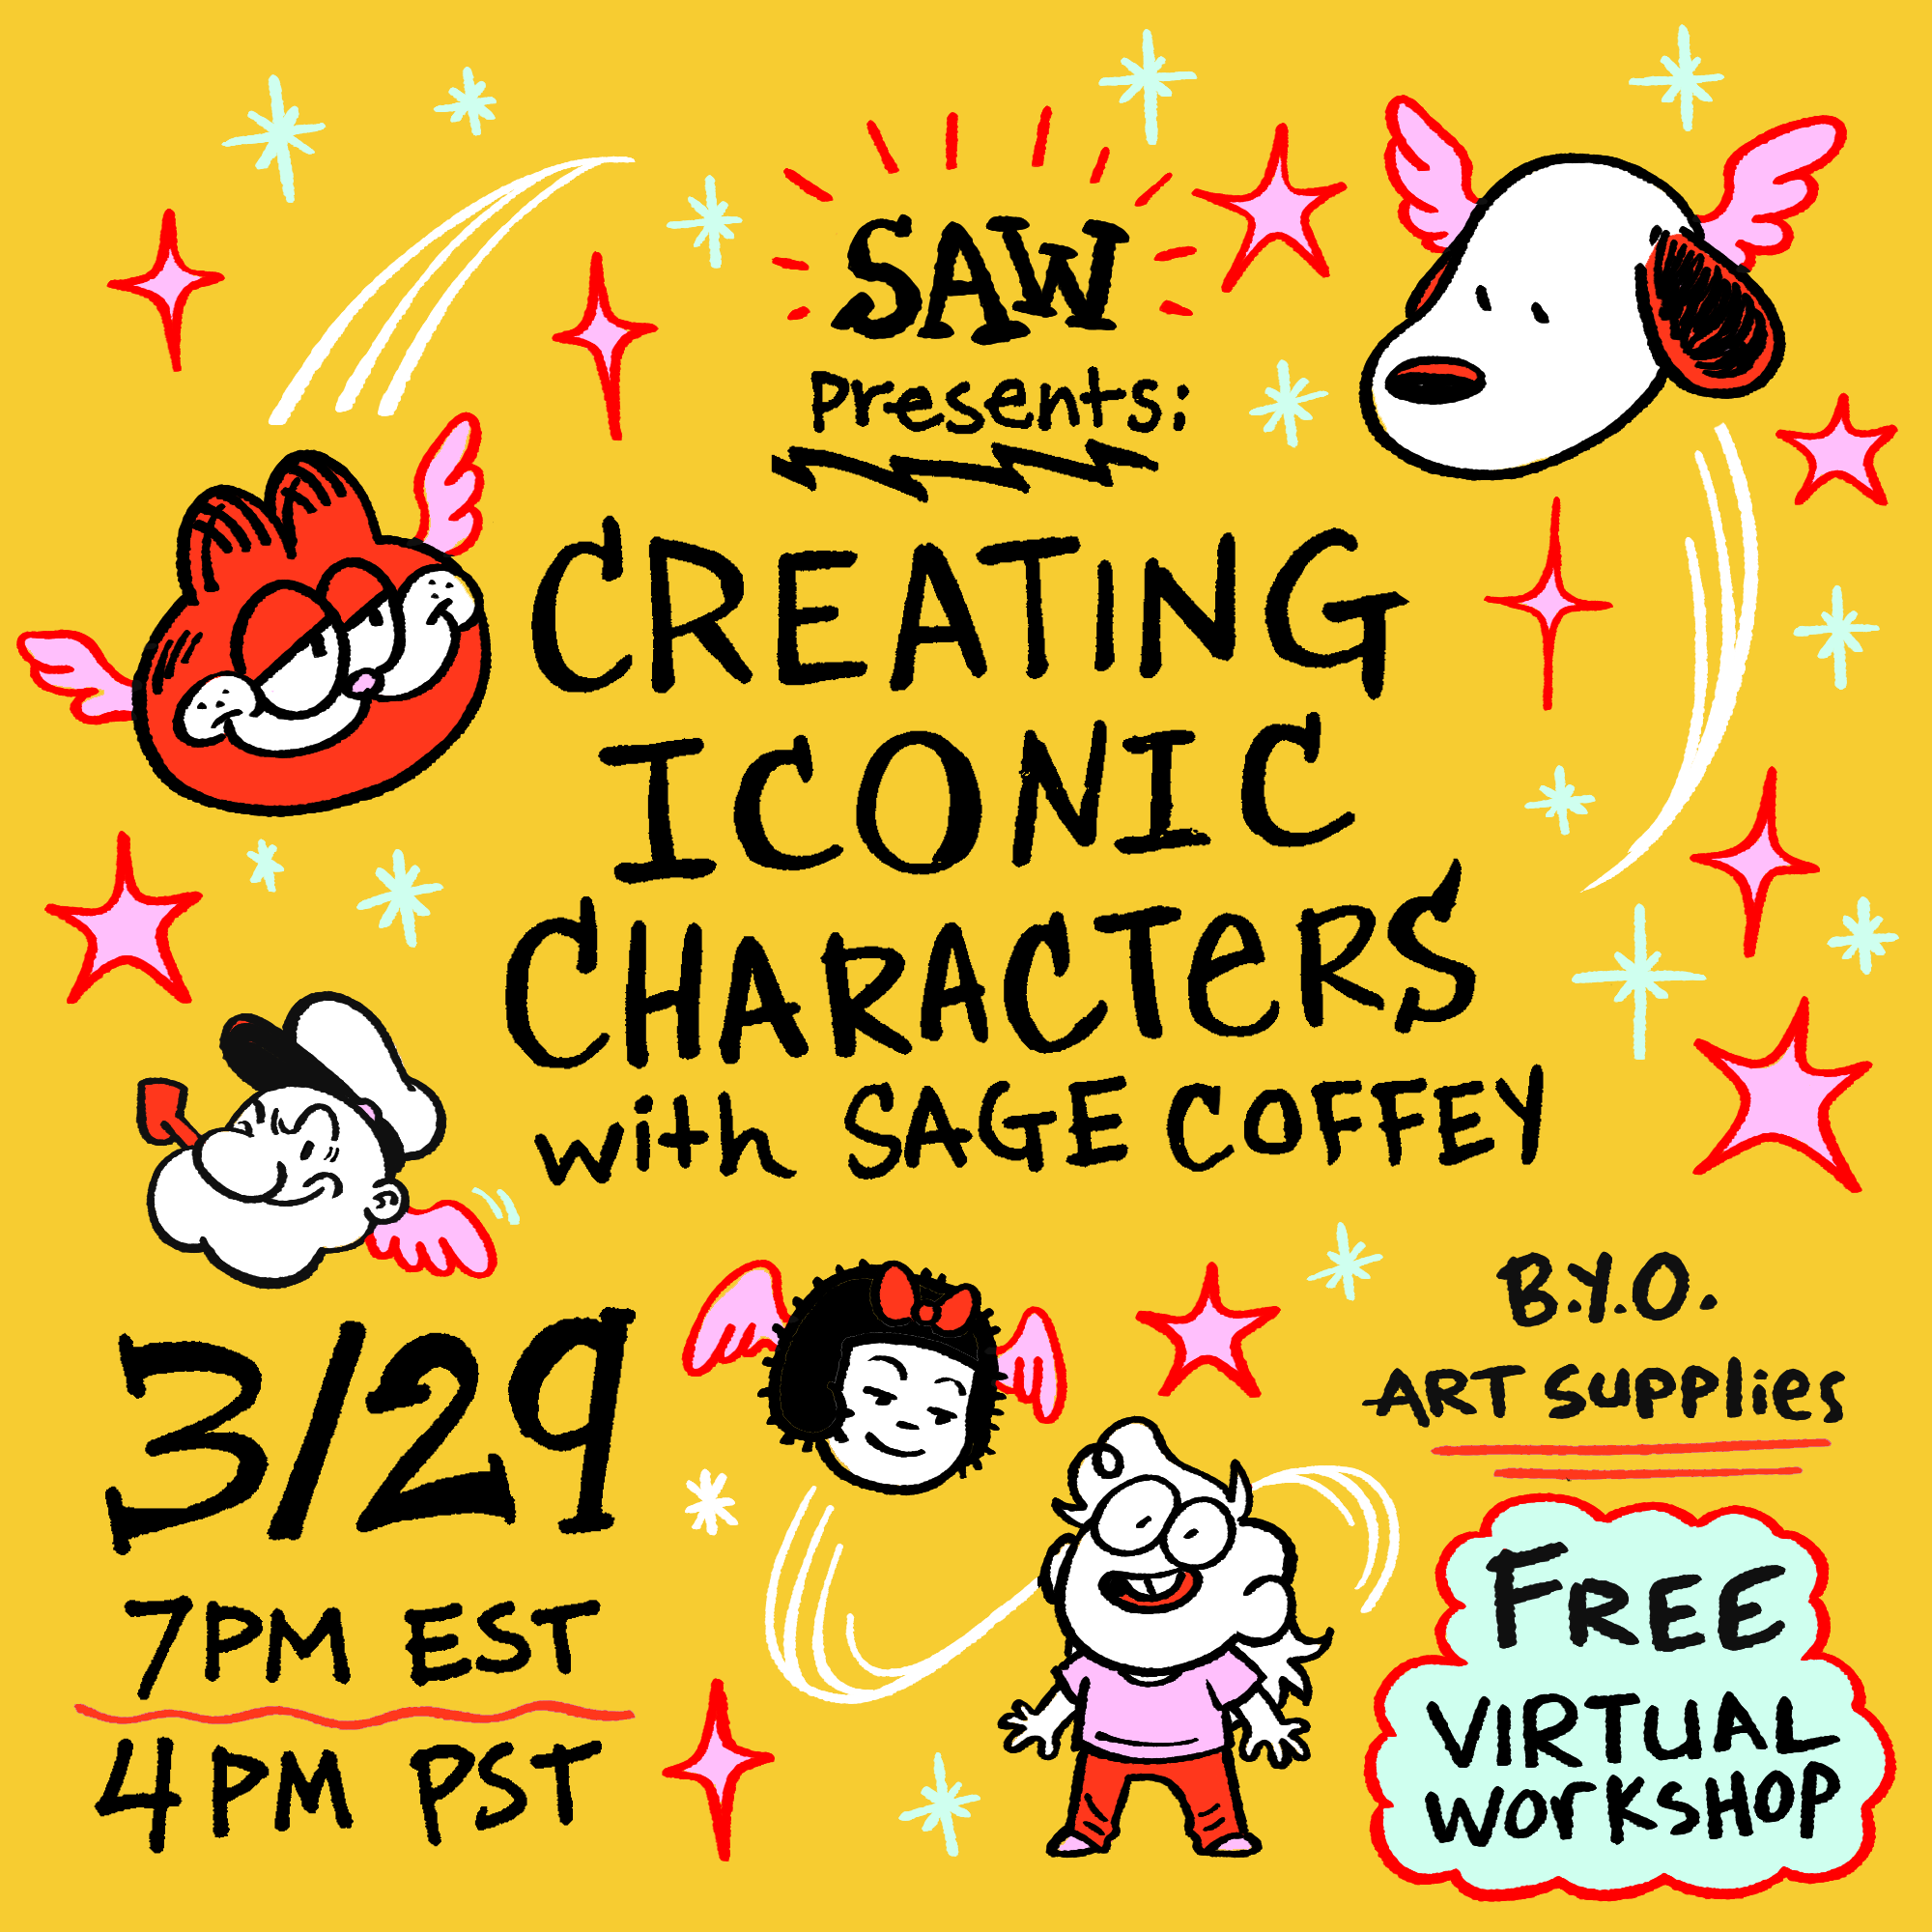 Promo graphic reading in black text over a bright yellow background: â€œSAW presents: Creating Iconic Characters with Sage Coffey / 3/29 7pm EST 4pm PST / B.Y.O. art supplies, Free virtual workshop.â€ The heads of Garfield, Snoopy, Popeye, and Nancy, each with red and pink angel wings, circle the text, and at the bottom a small cartoon figure of Sage looks up excitedly at them. Red and pink stars, light sparkles, and motion lines decorate the empty space.